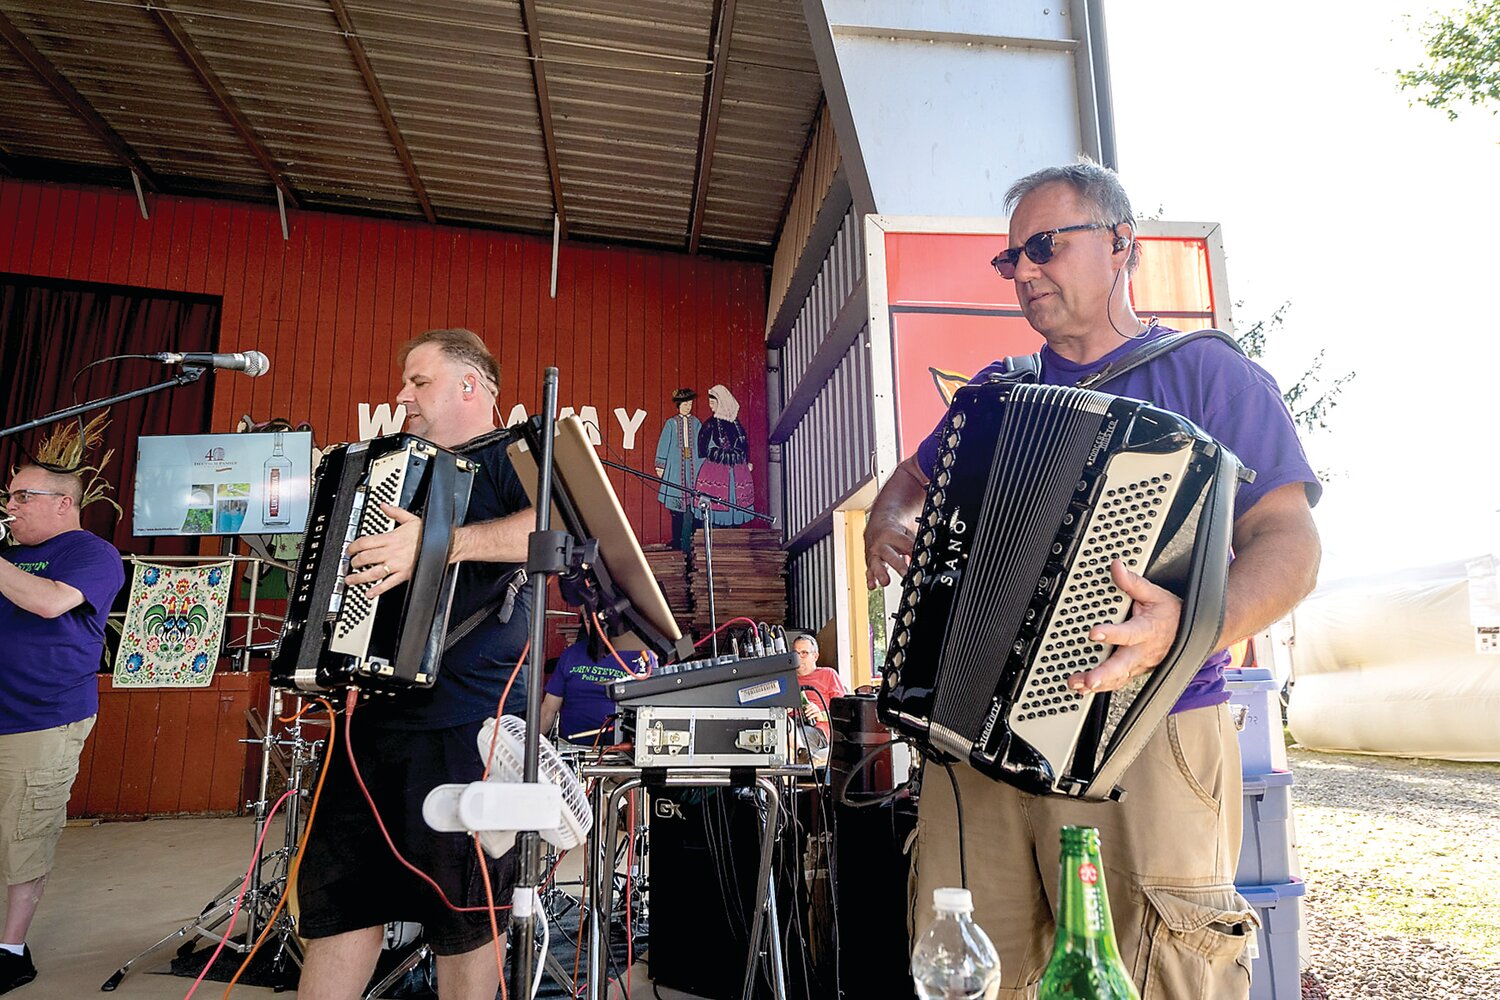 The John Stevens Band plays traditional polka music, as audience members danced during the 57th Annual Polish American Family Festival & Country Fair Sunday at Our Lady of Czestochowa in New Britain Township. The fair continues this weekend.